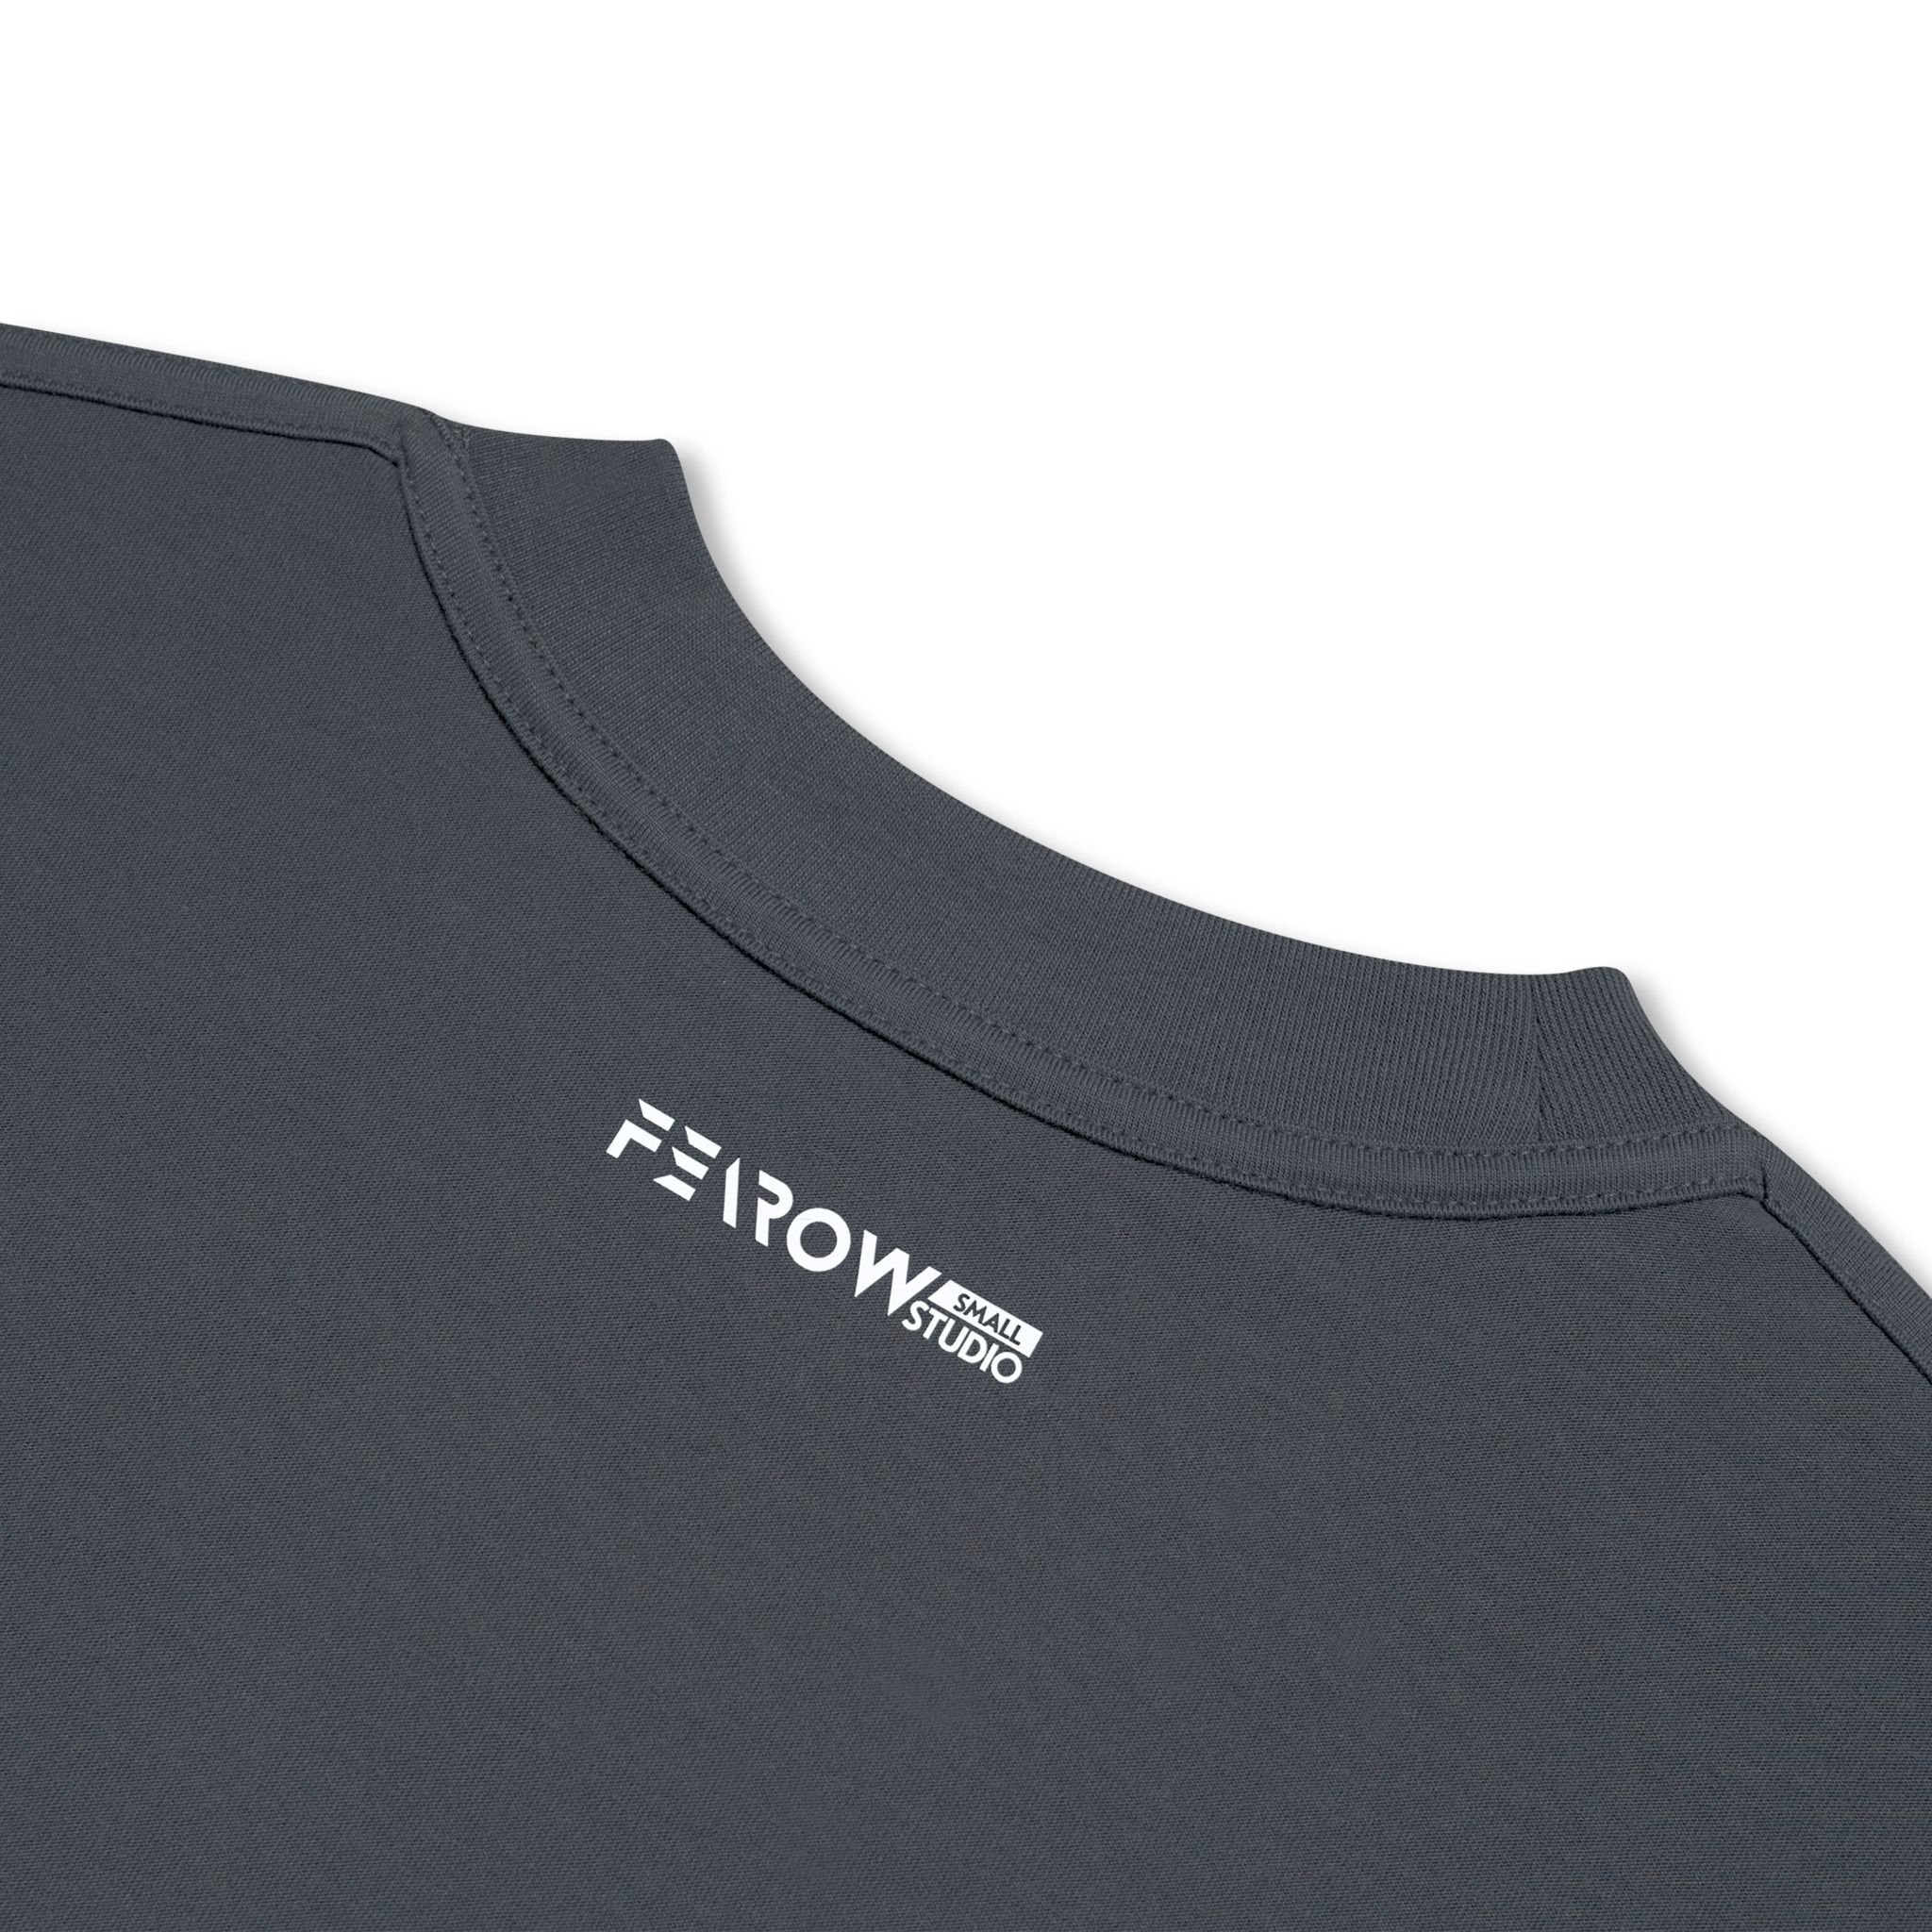  Fearow Double Tee Collection - Donut / Gray Pinstripe 